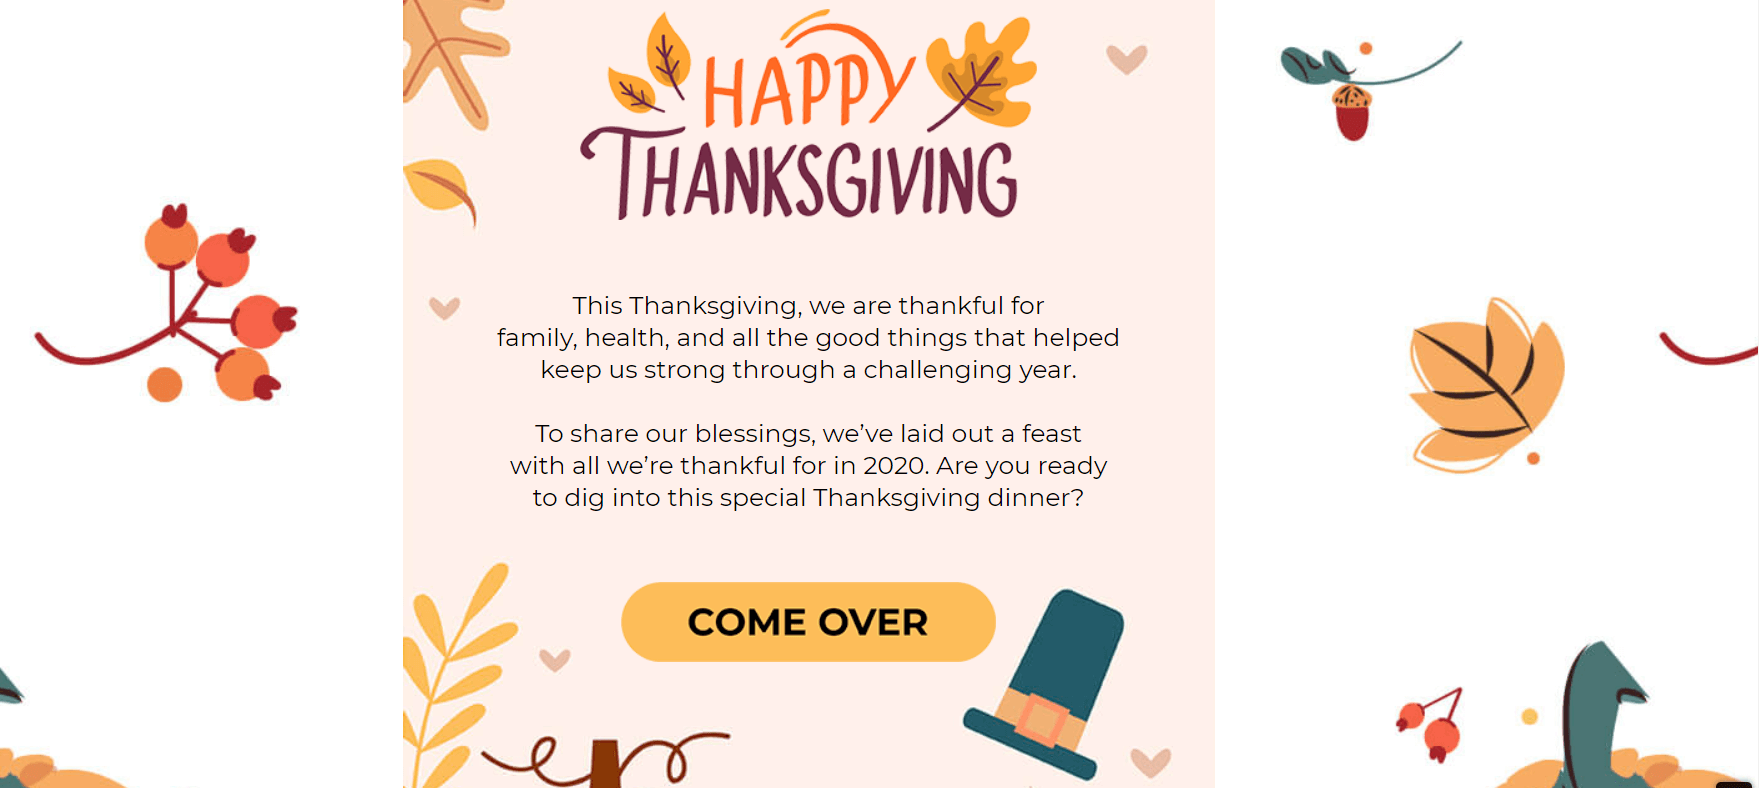 Thanksgiving Day email